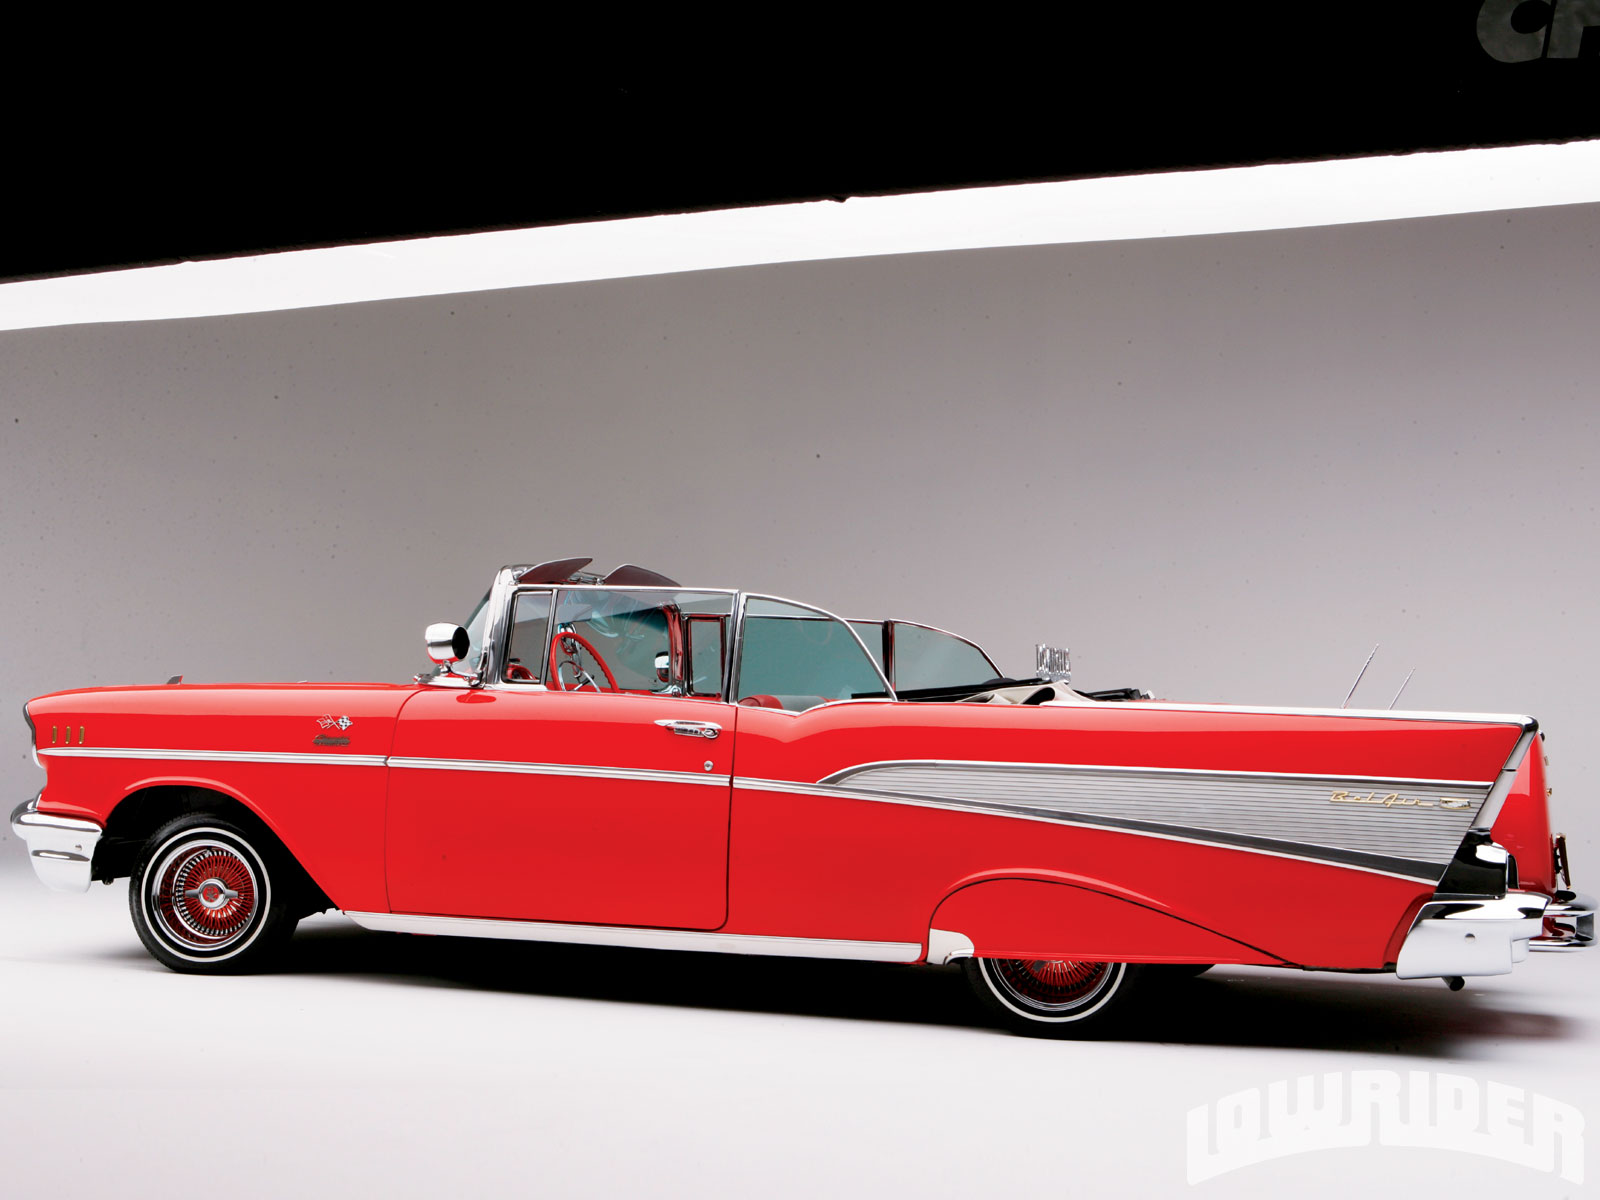 Chevrolet Bel Air Convertible Backgrounds on Wallpapers Vista